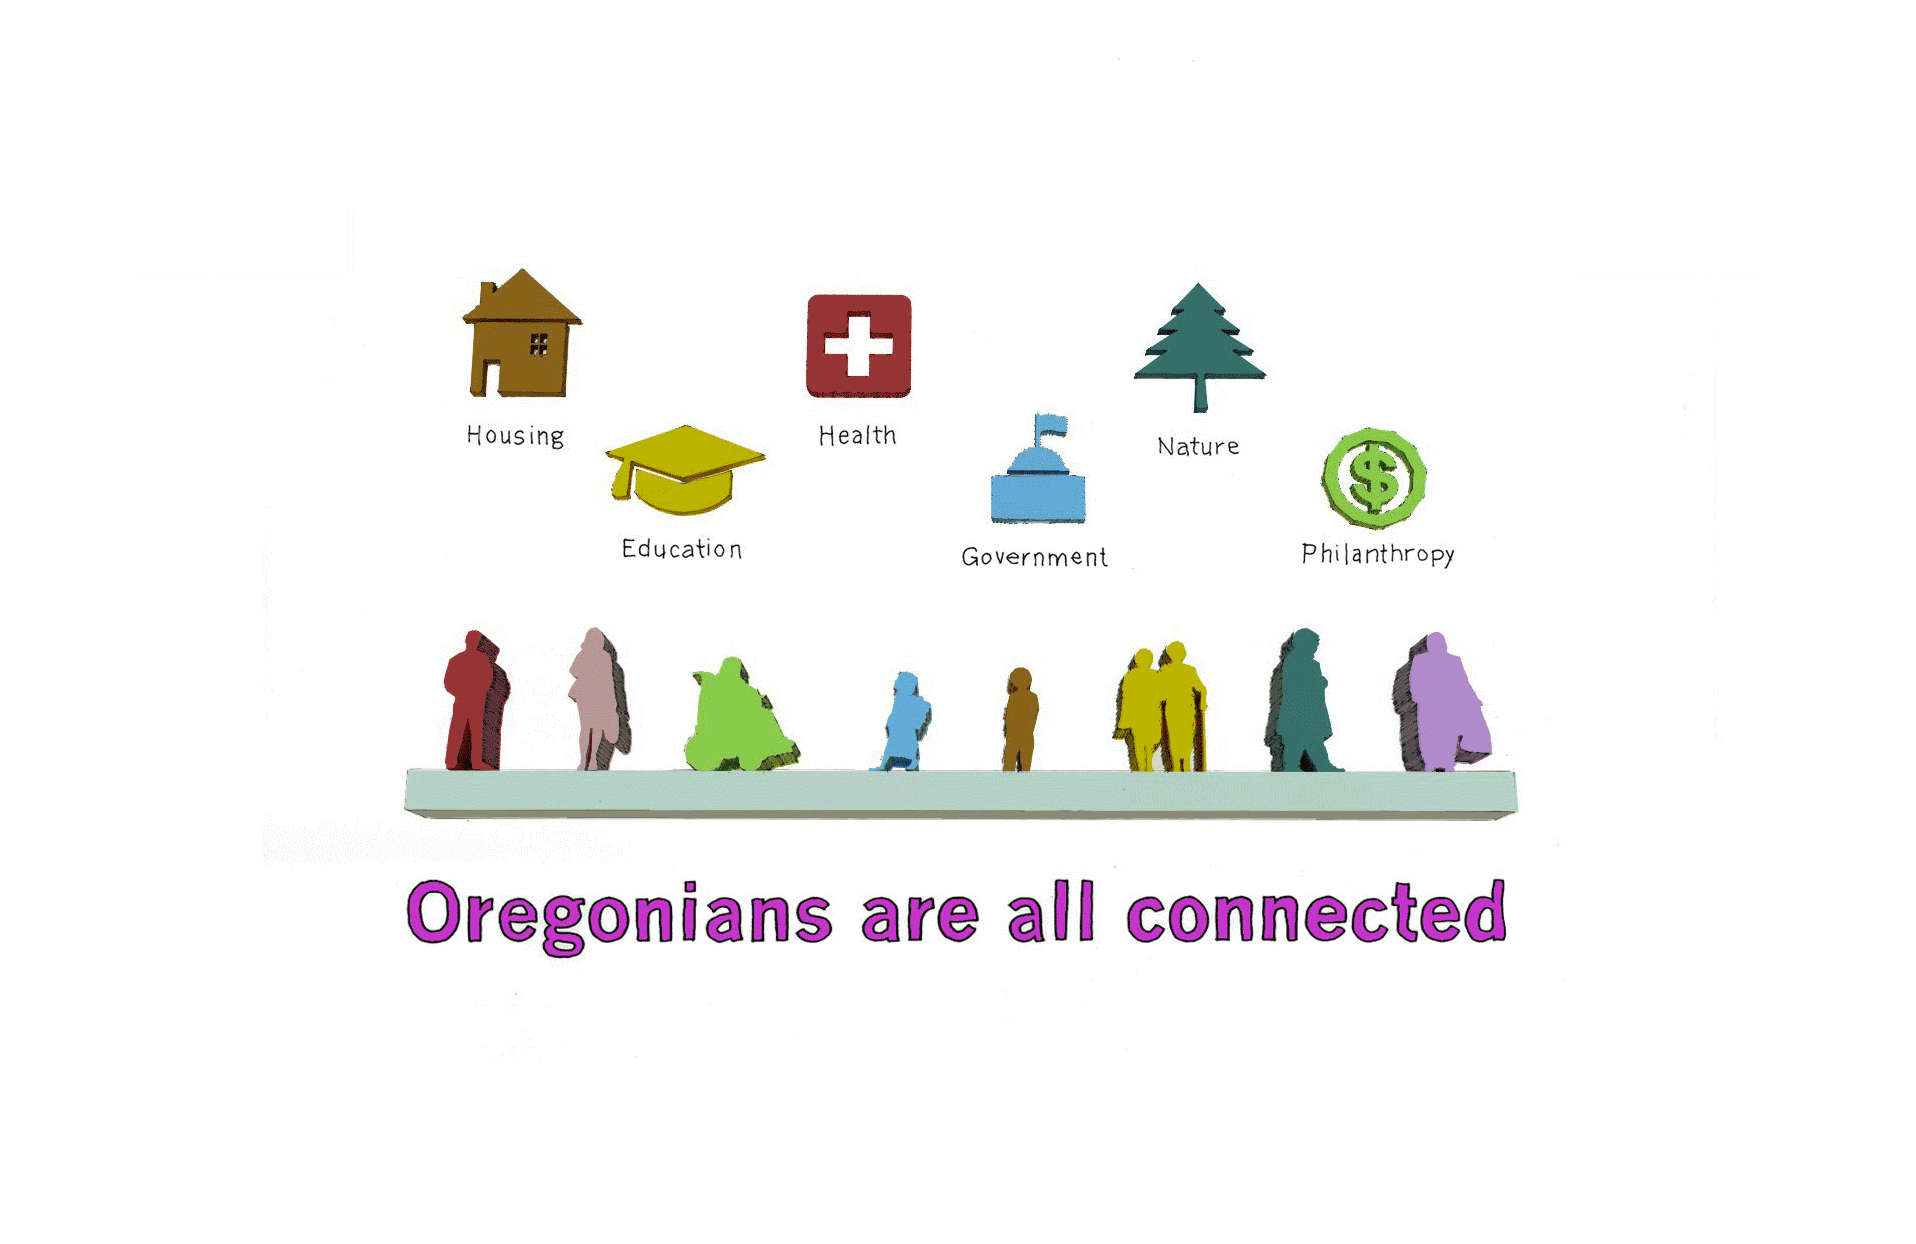 Oregonians Are All Connected by Marc Asnis, (he/him), and Kathryn Hartinger, (she/her), second place winners of the 2016 Equity Illustrated adult design contest sponsored by Meyer Memorial Trust and Northwest Health Foundation.